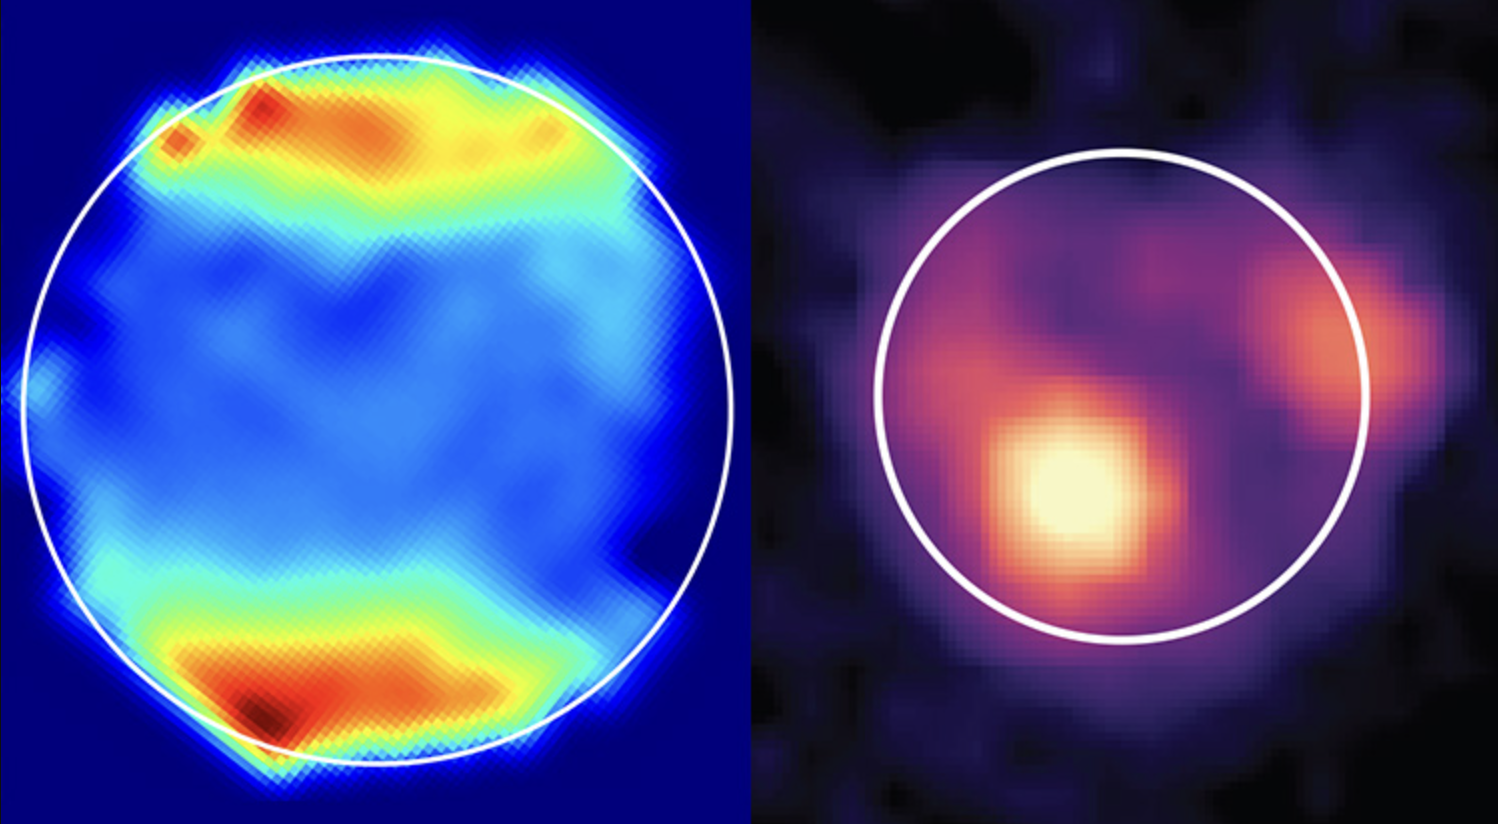 A spectroscopic map of Ganymede and an infrared image of Io by James Webb